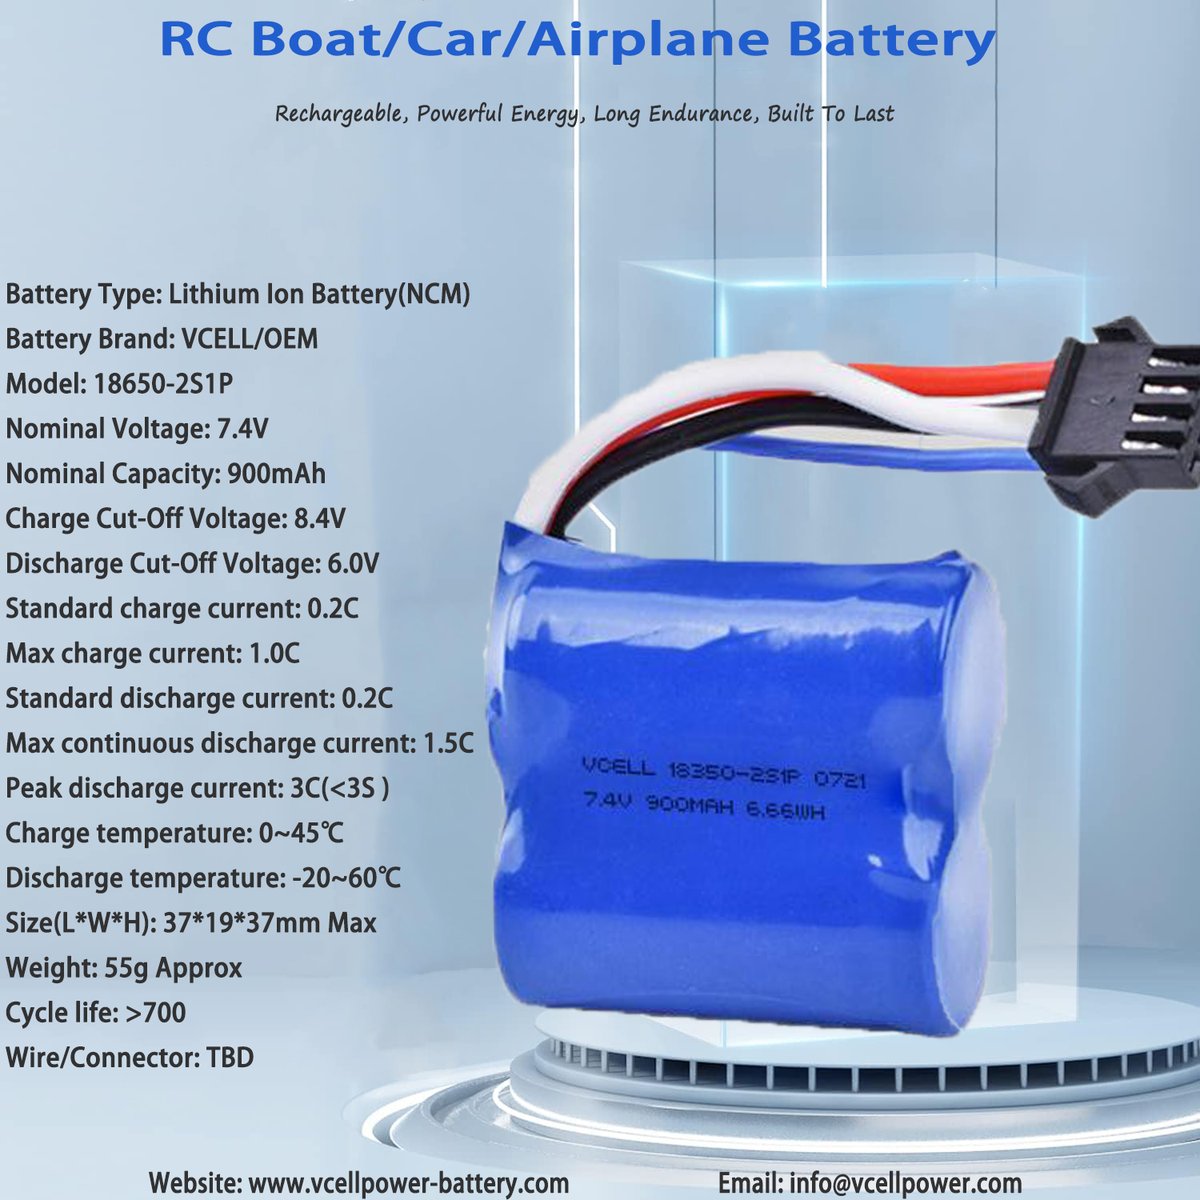 🚓🚤🛫Vcell RC boat/car/airplane battery, top quality, competitive price, welcome to inquiry~
#lithiumionbattery #batteryfactory #batterypack #diyproject #rccars #rcboat #rcairplane #vcell